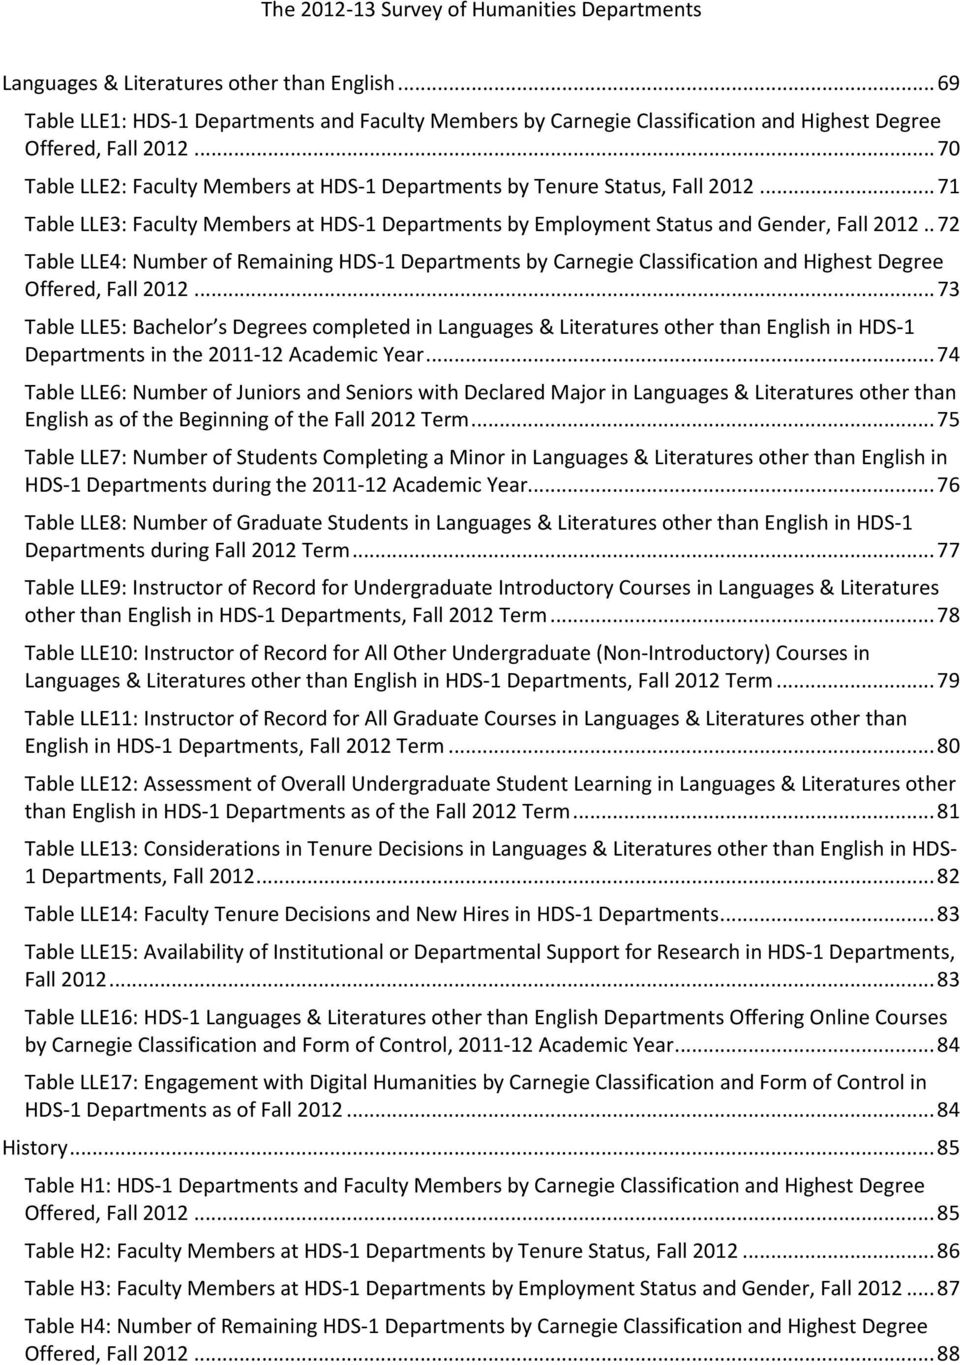 . 72 Table LLE4: Number of Remaining HDS-1 Departments by Carnegie Classification and Highest Degree Offered, Fall 2012.